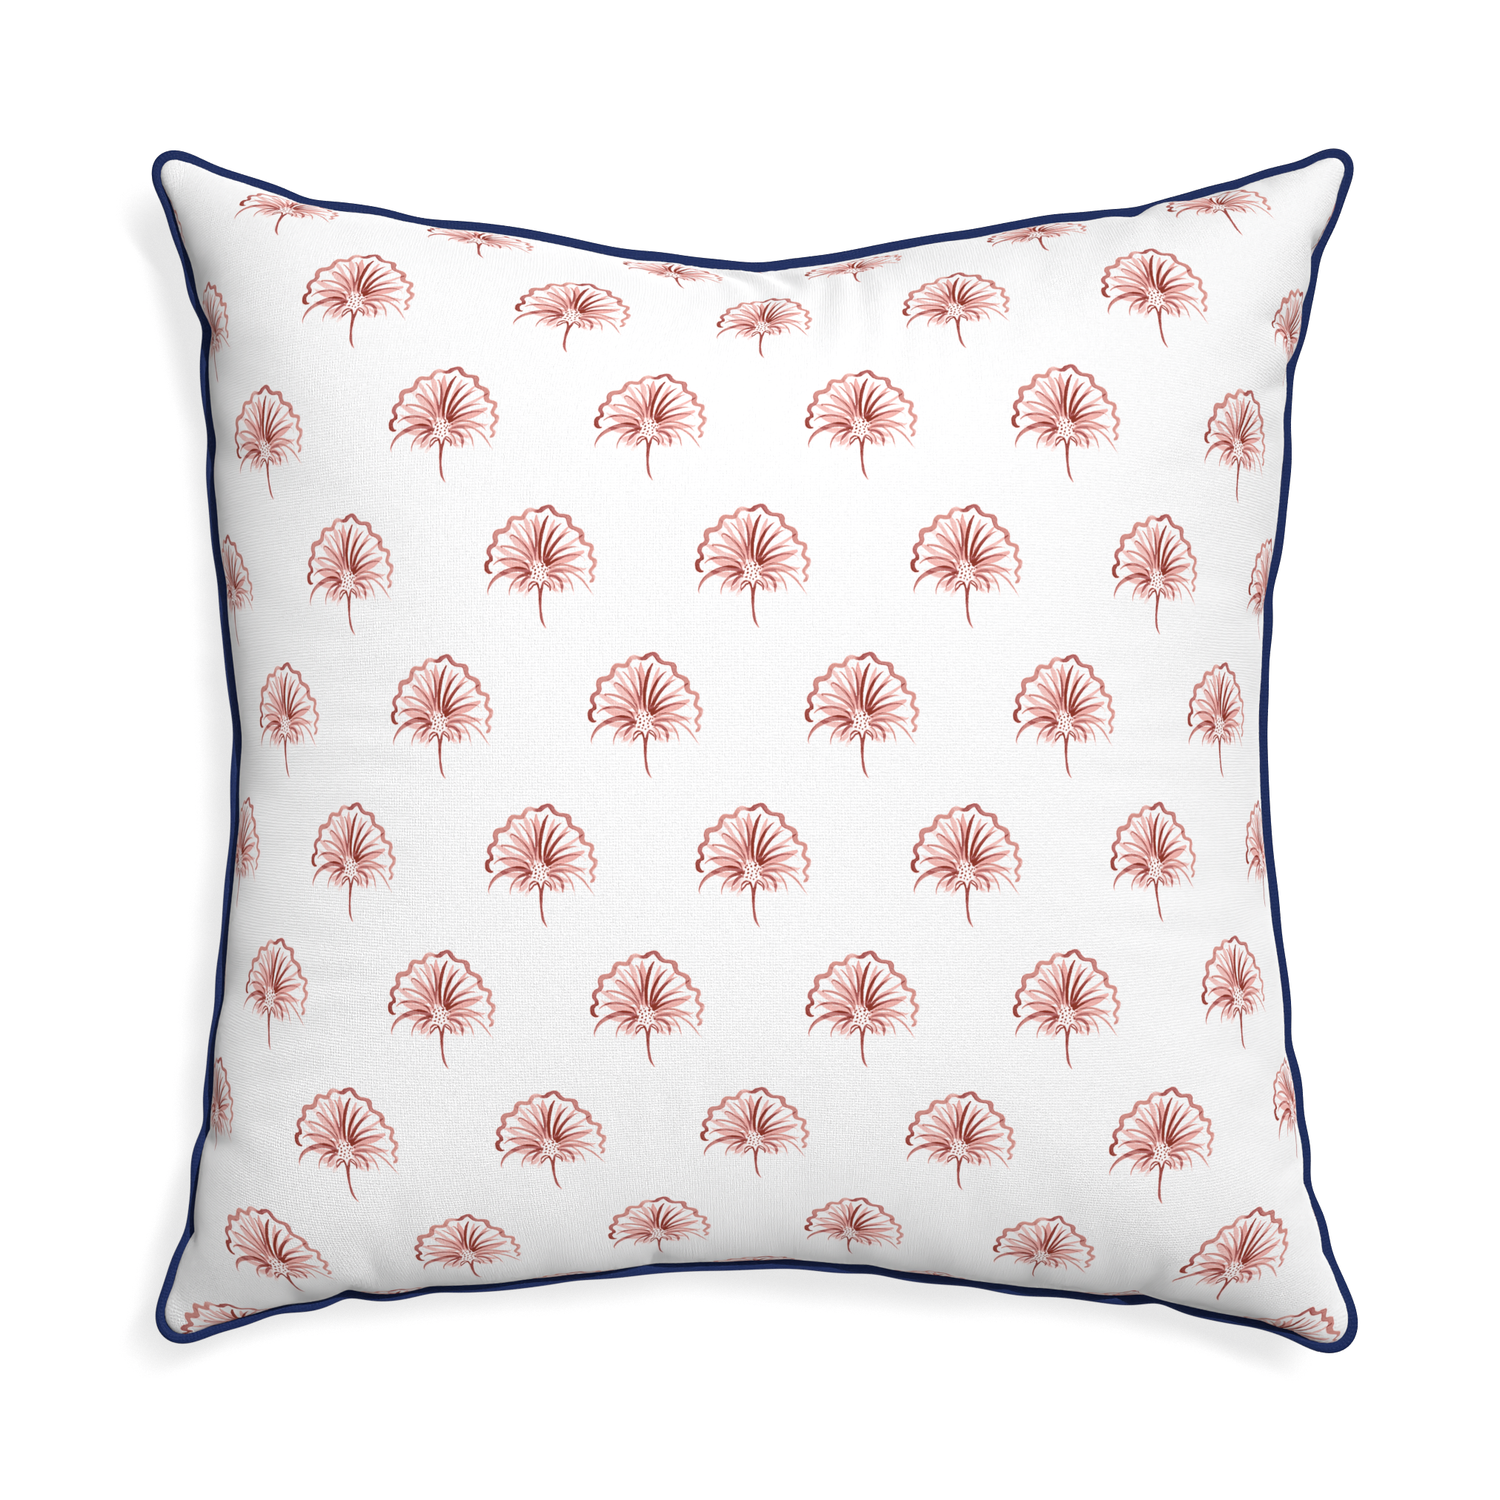 Euro-sham penelope rose custom pillow with midnight piping on white background